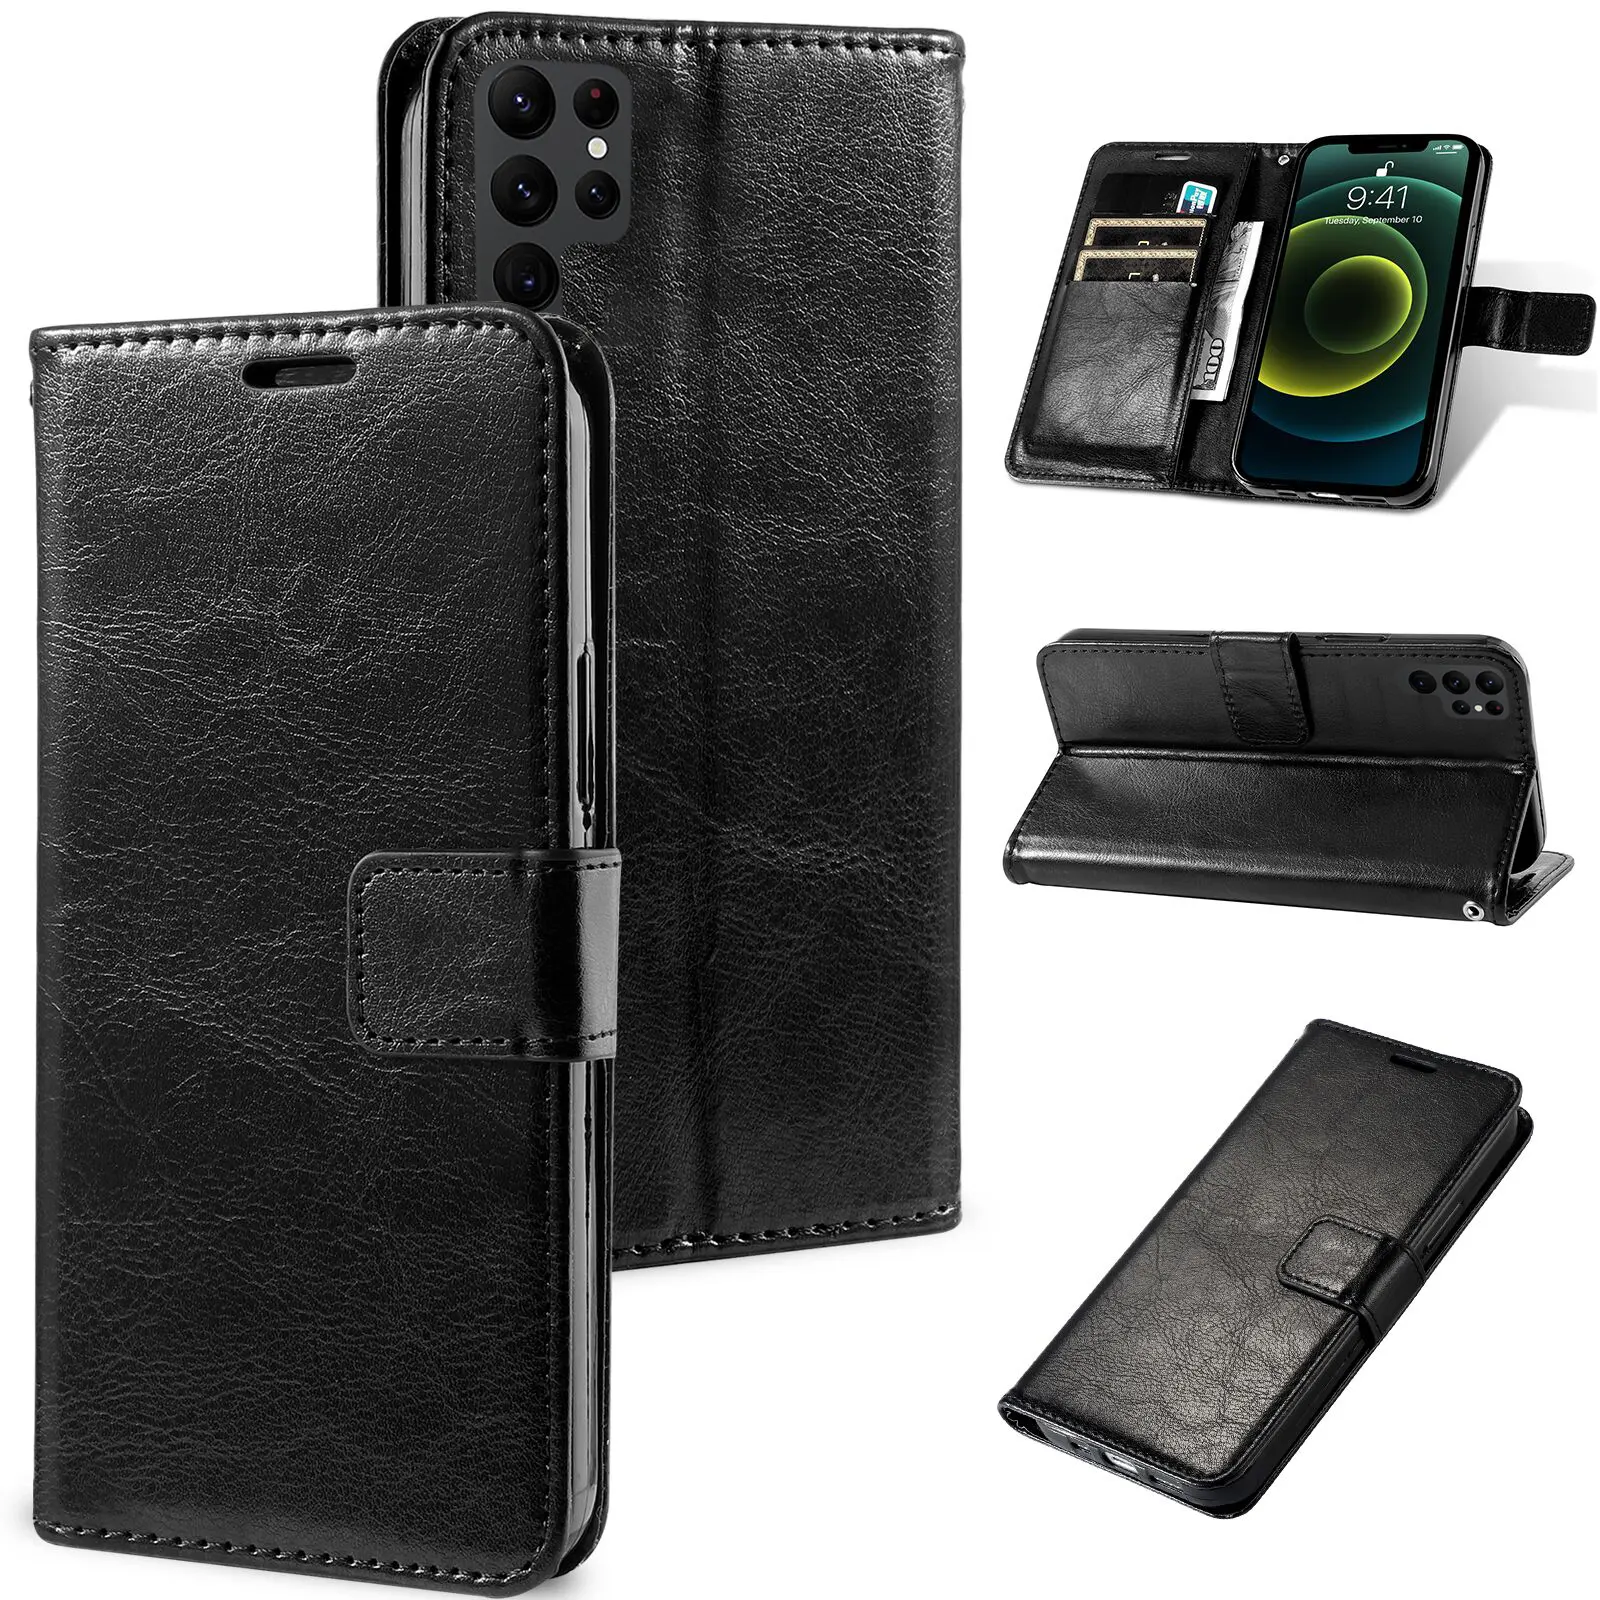 Classic Wallet Leather Case Mobile Phone Bags For Samsung Galaxy S23 Note 20 Ultra S22 Plus A54 A34 A24 Flip Cover Accessories